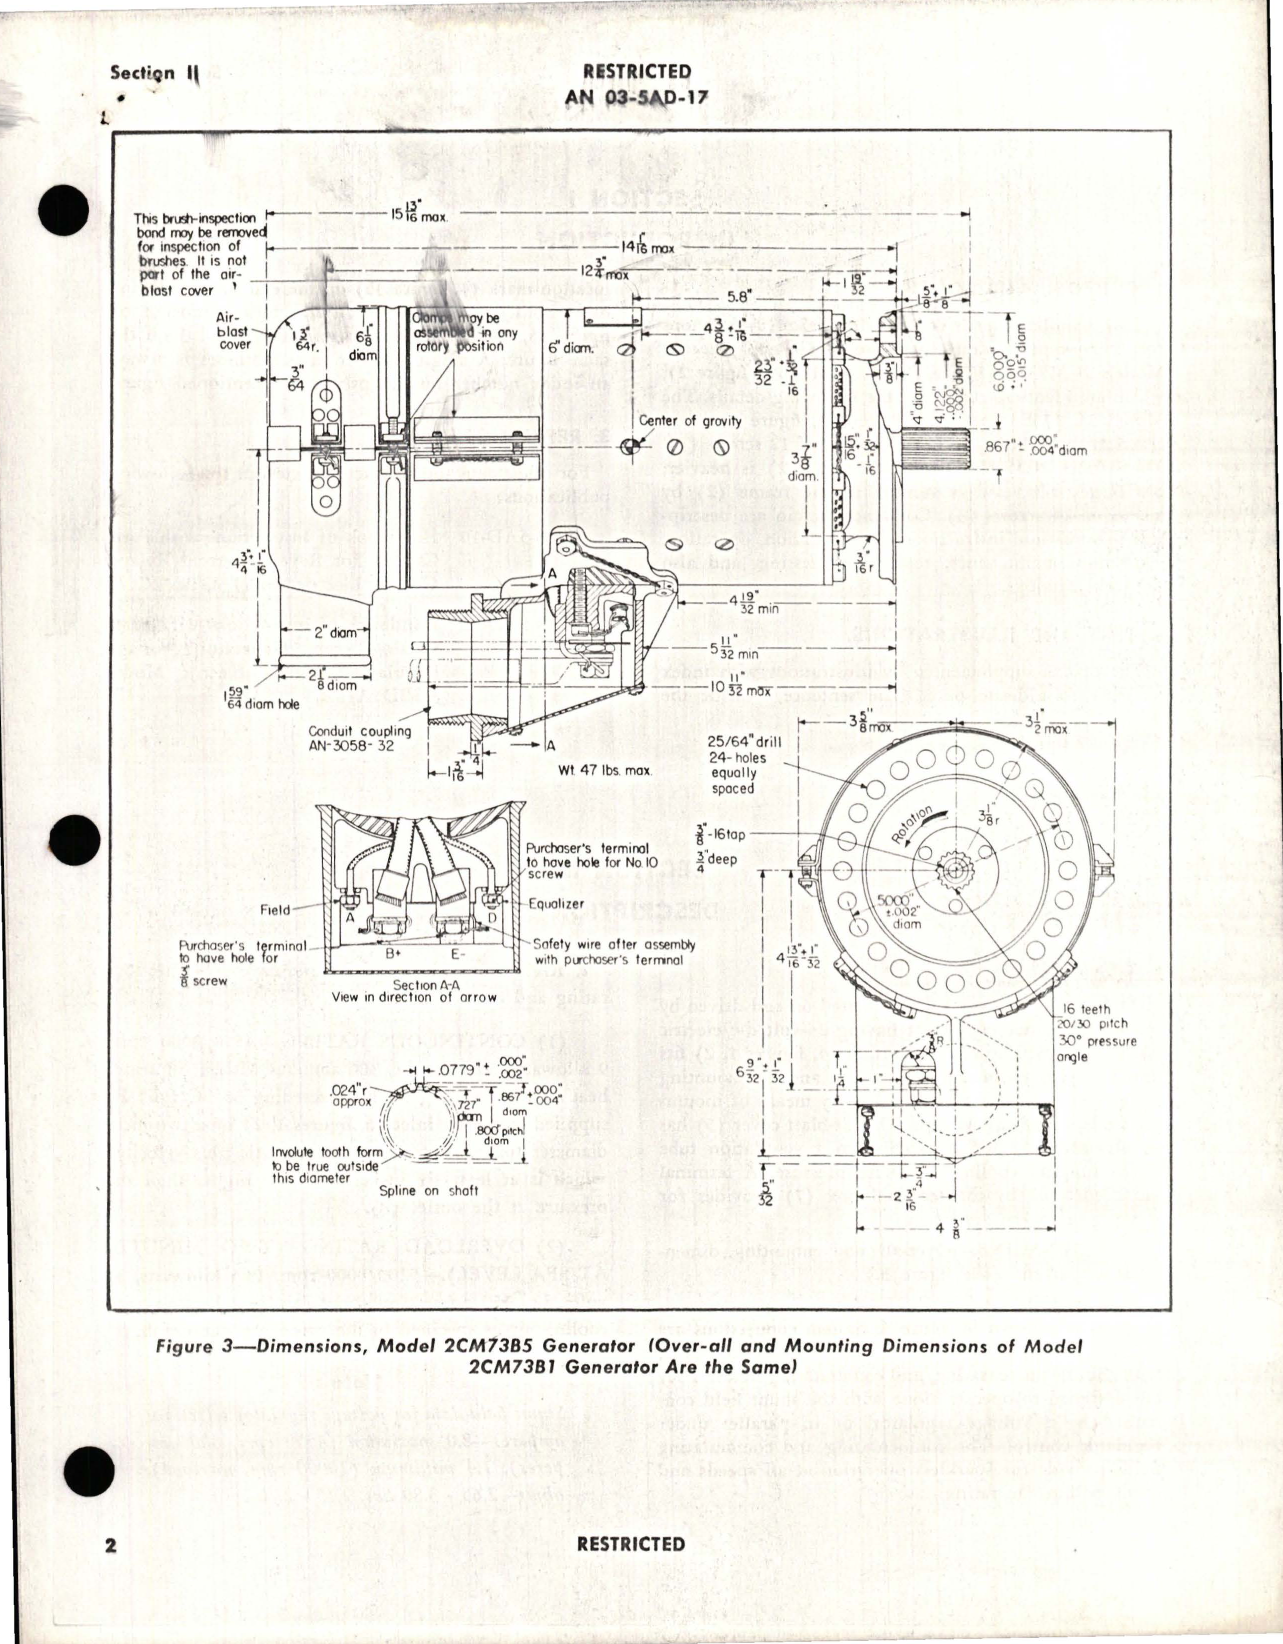 Sample page 7 from AirCorps Library document: Operation, Service and Overhaul Instructions with Parts Catalog for Aircraft Generators - Models 2CM73B1 and 2CM73B5 